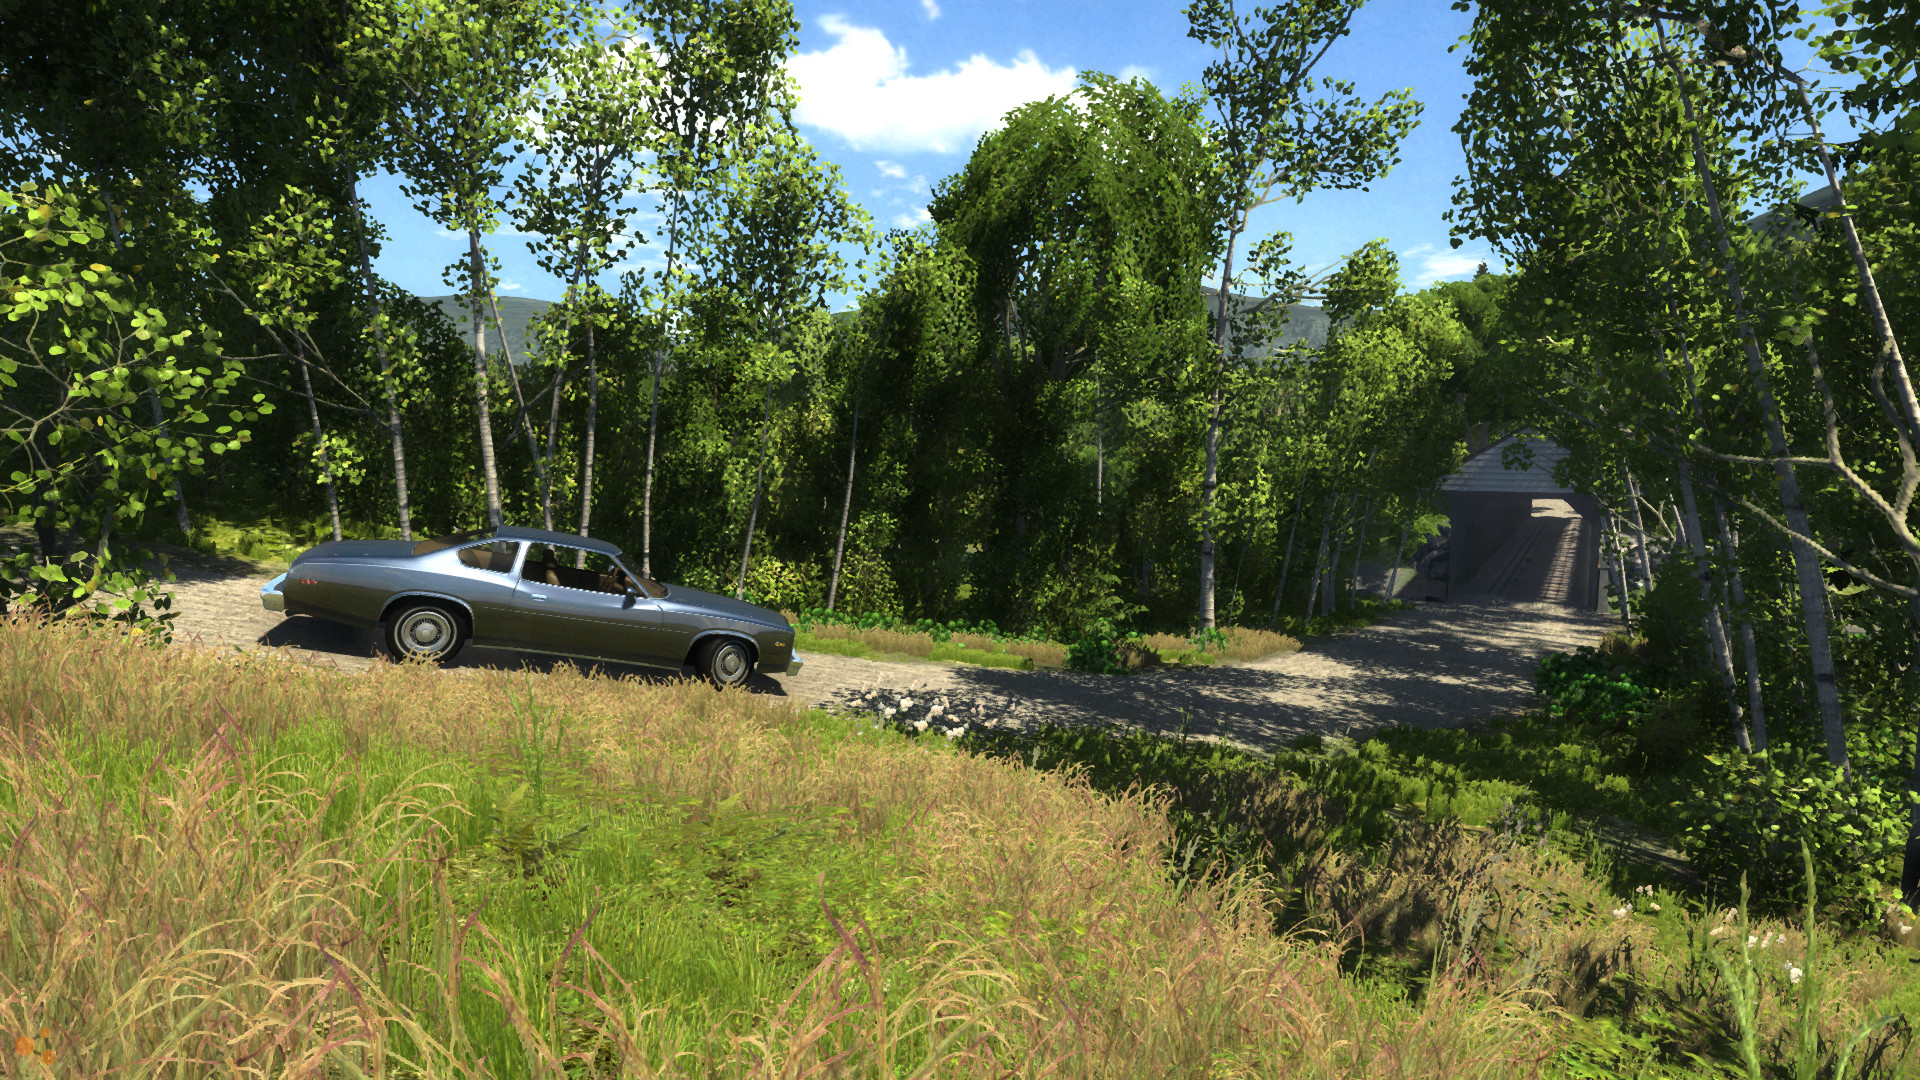 beamng drive unblocked games